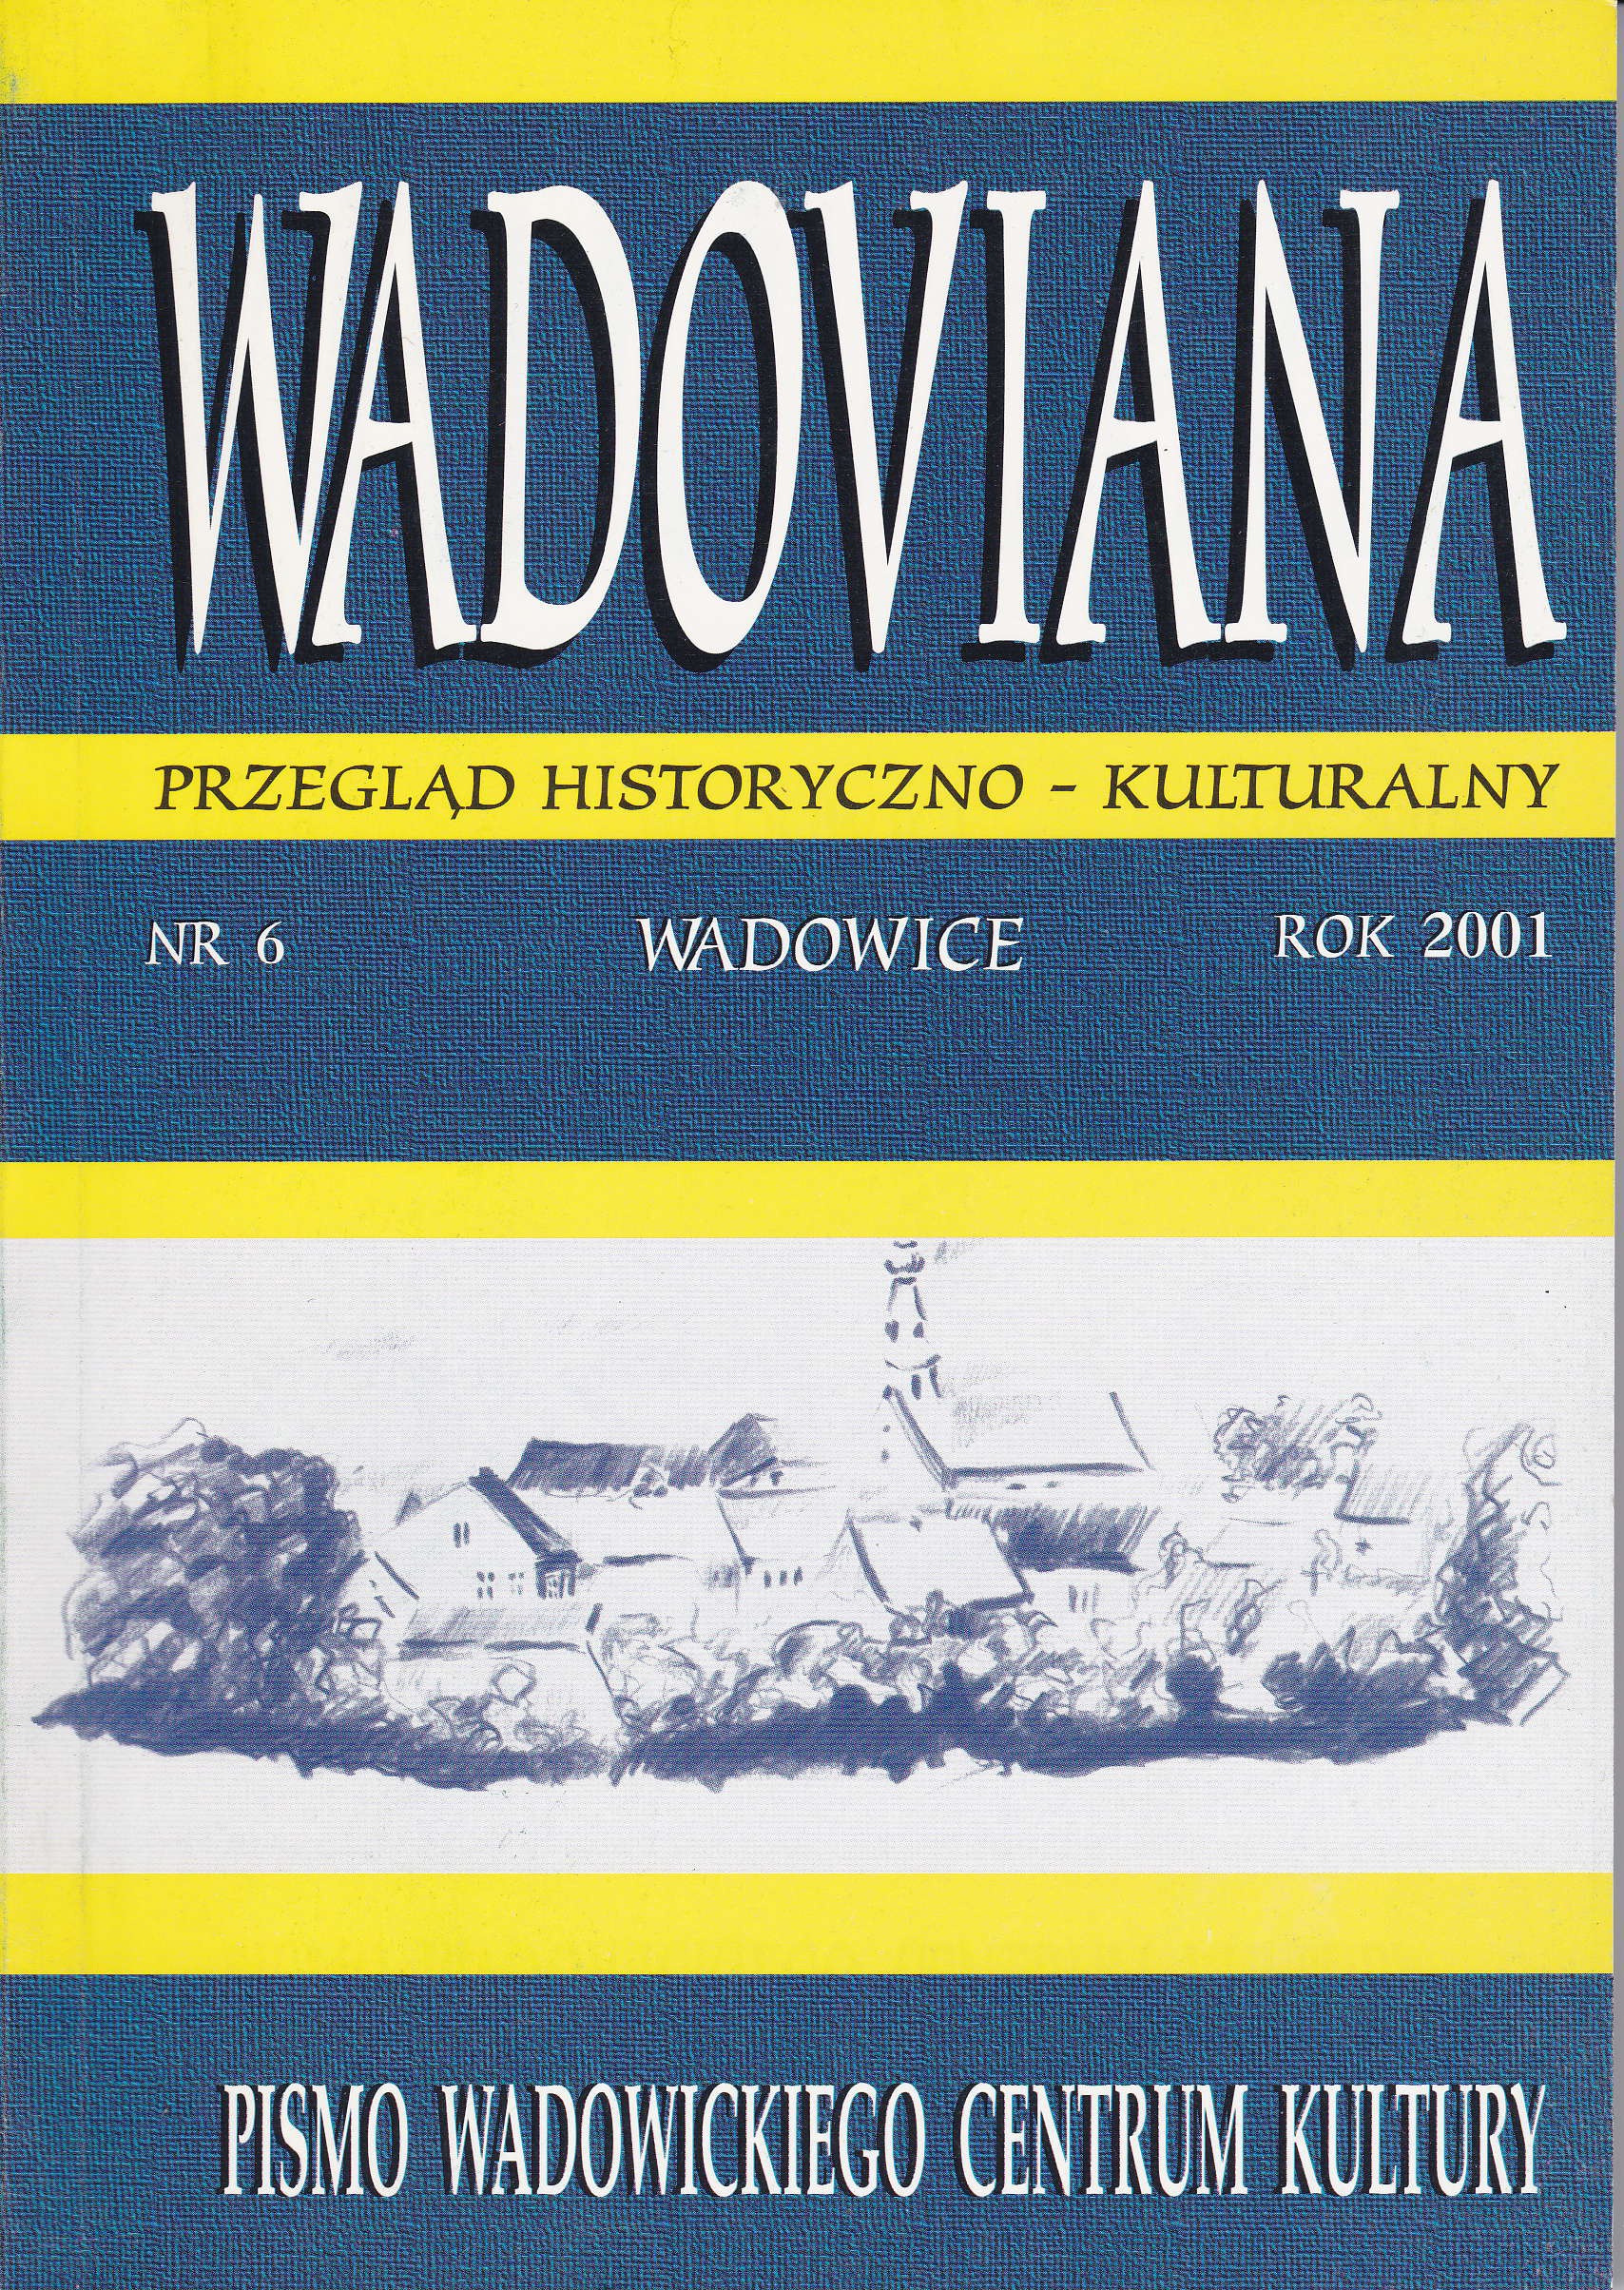 Humanistic dissertations in the Reports of the Wadowice's gymnasium. Reconnaissance Cover Image